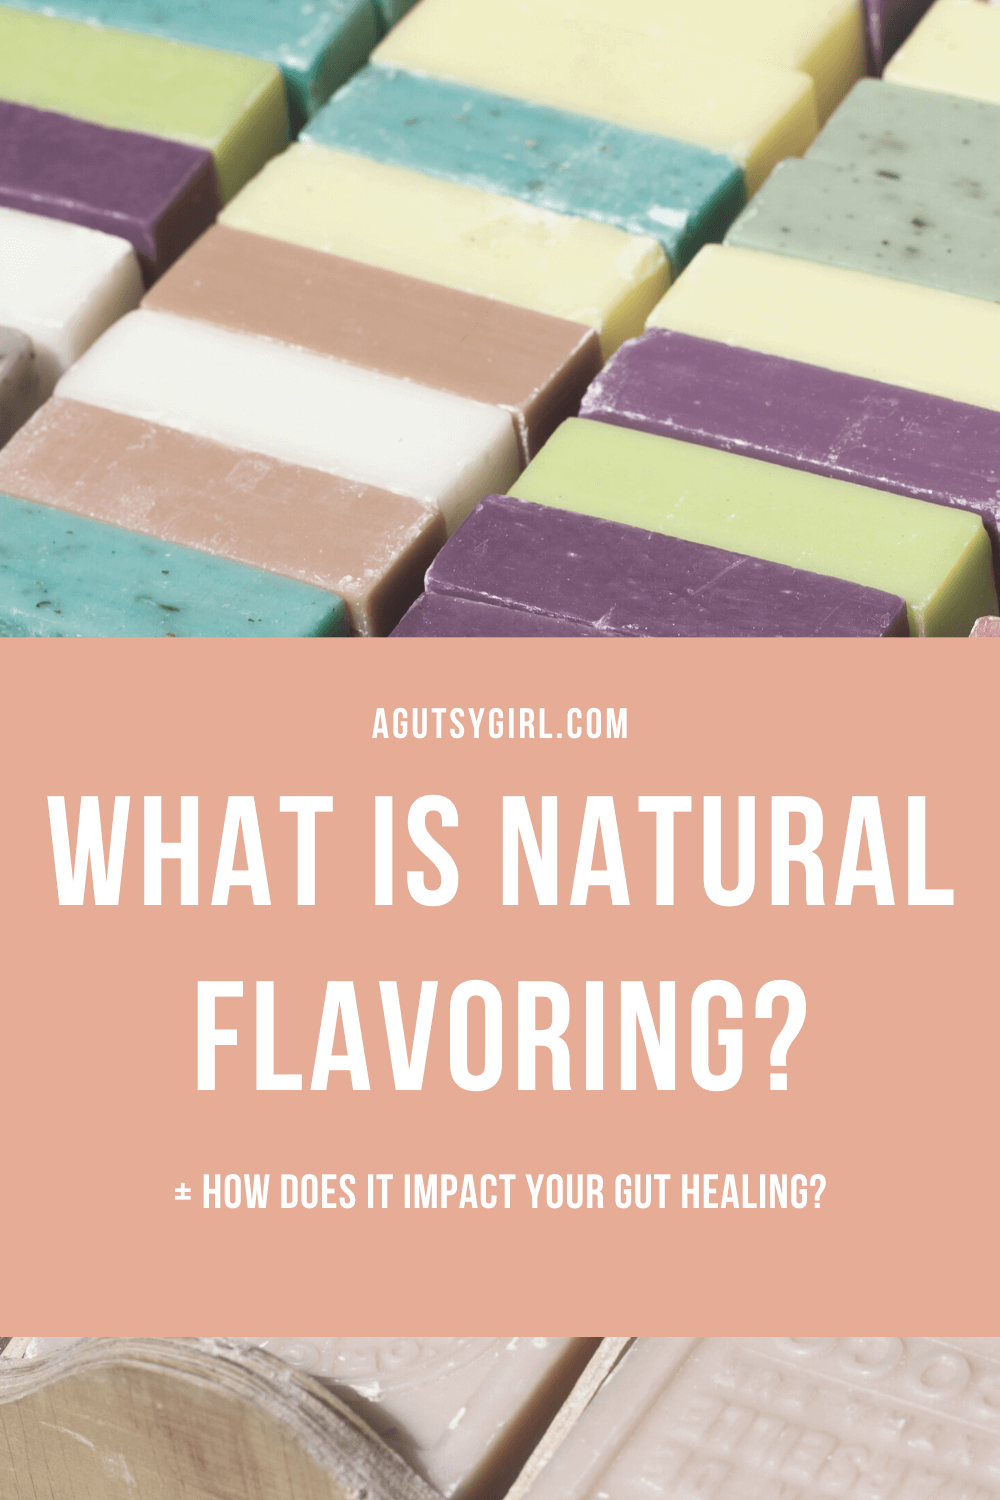 What is Natural Flavoring agutsygirl.com and how does it affect your gut healing #guthealth #naturalflavoring #healthyliving